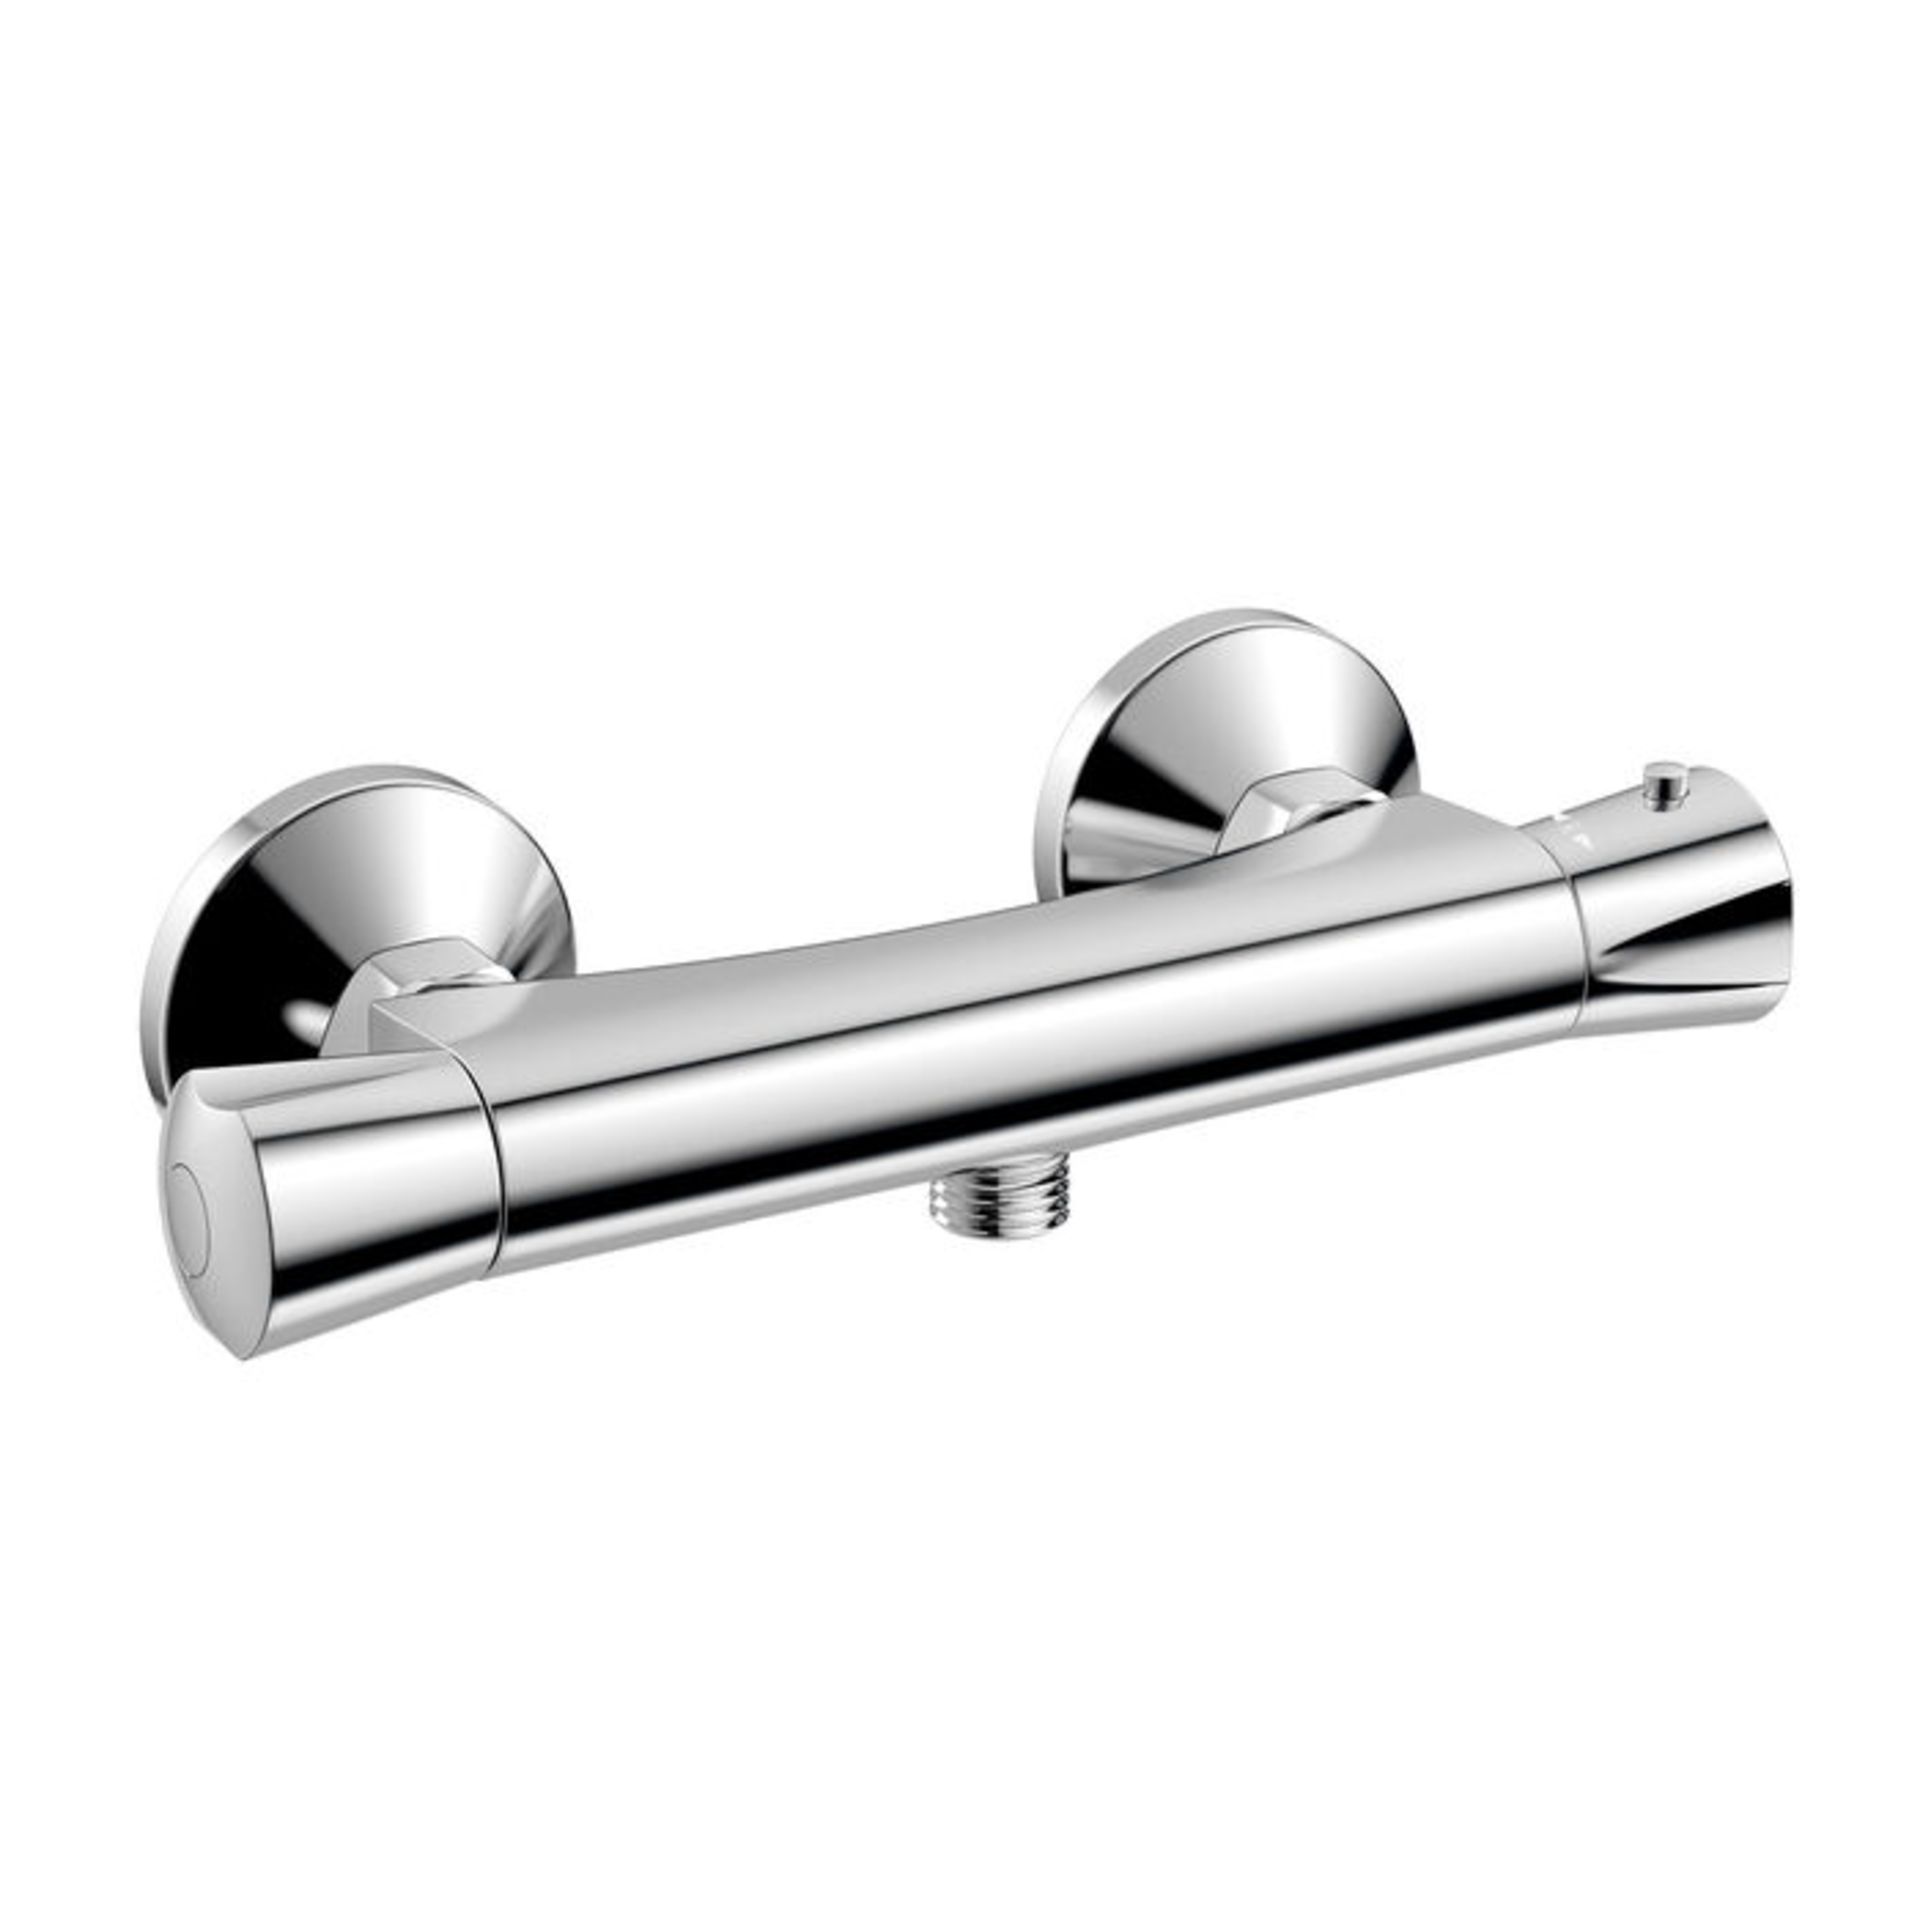 (RK1039) Thermostatic Shower Valve - Round Bar Mixer Chrome plated solid brass mixer Cool to ... - Image 2 of 2